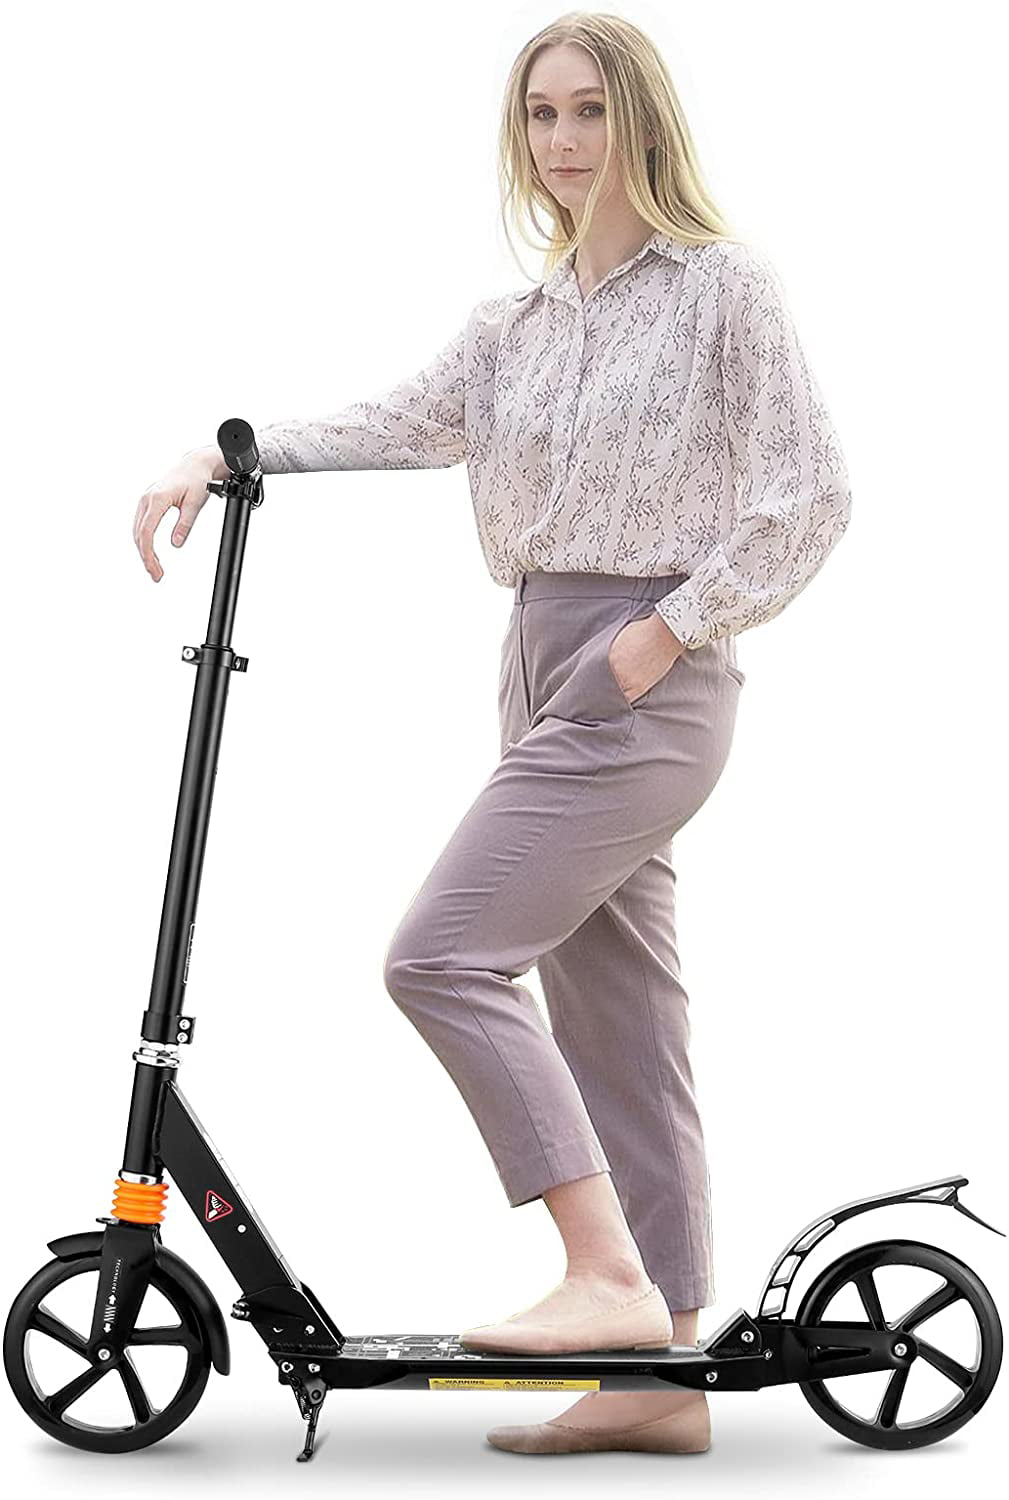 Urban Town Rider Folding Push Kick Scooter 200mm Wheels for Travel Adult Teen 